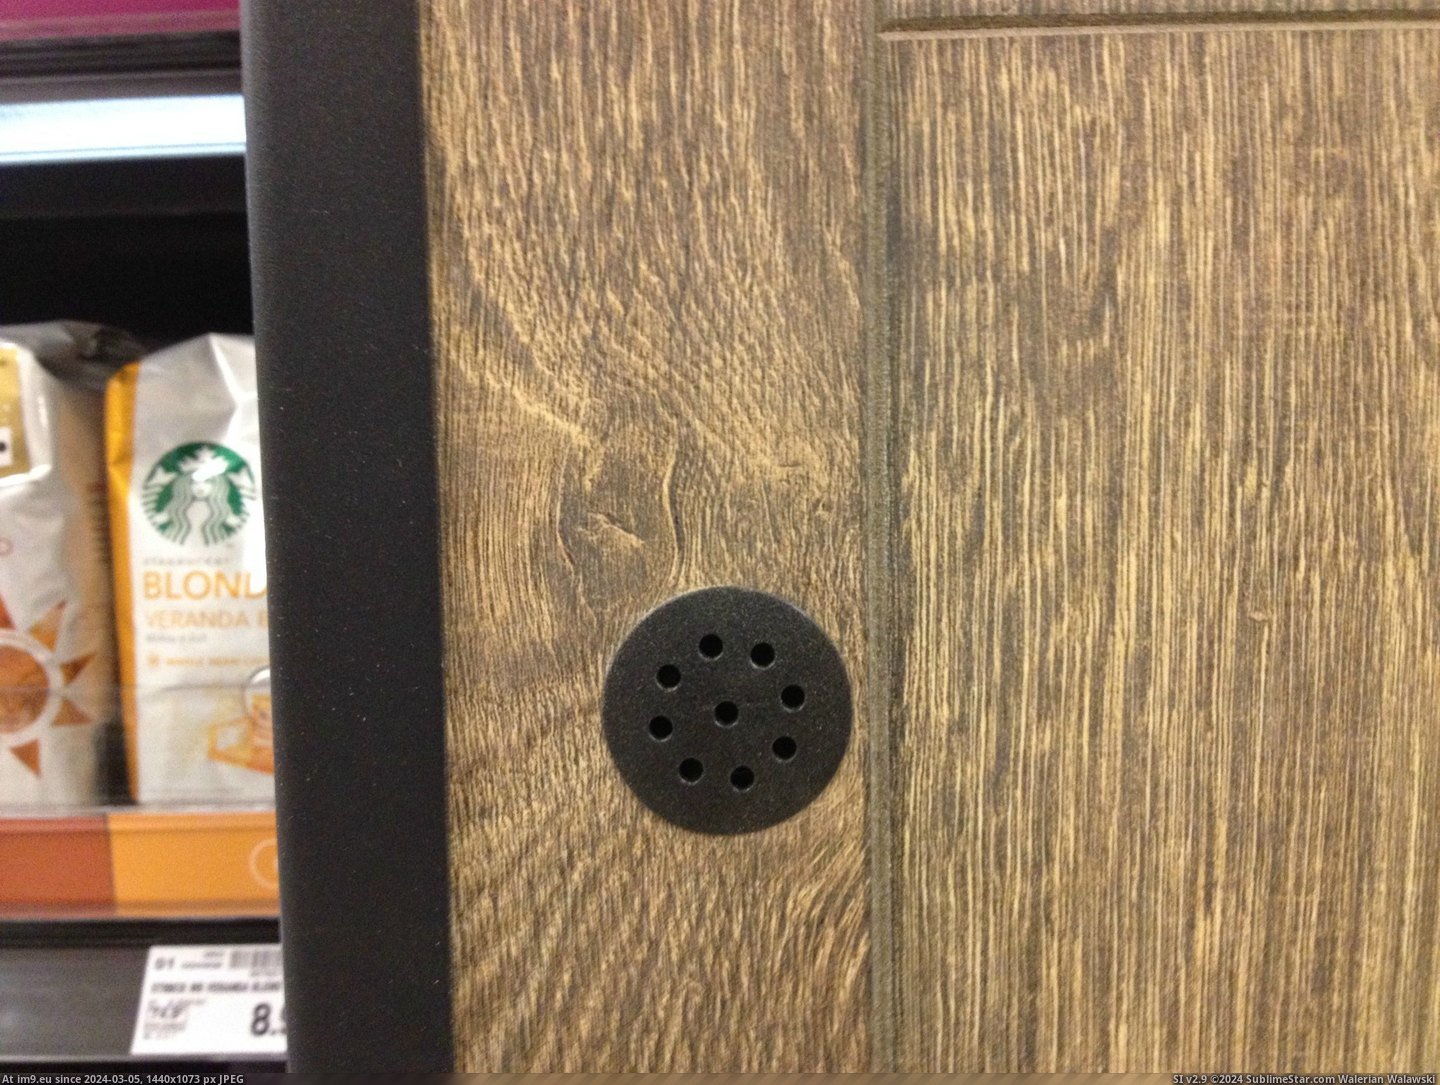 #Work #New #Secret #Smell #Delivery #Starbucks #Coffee #System #Display [Mildlyinteresting] The new Starbucks display at my work has a secret coffee smell delivery system. 4 Pic. (Obraz z album My r/MILDLYINTERESTING favs))